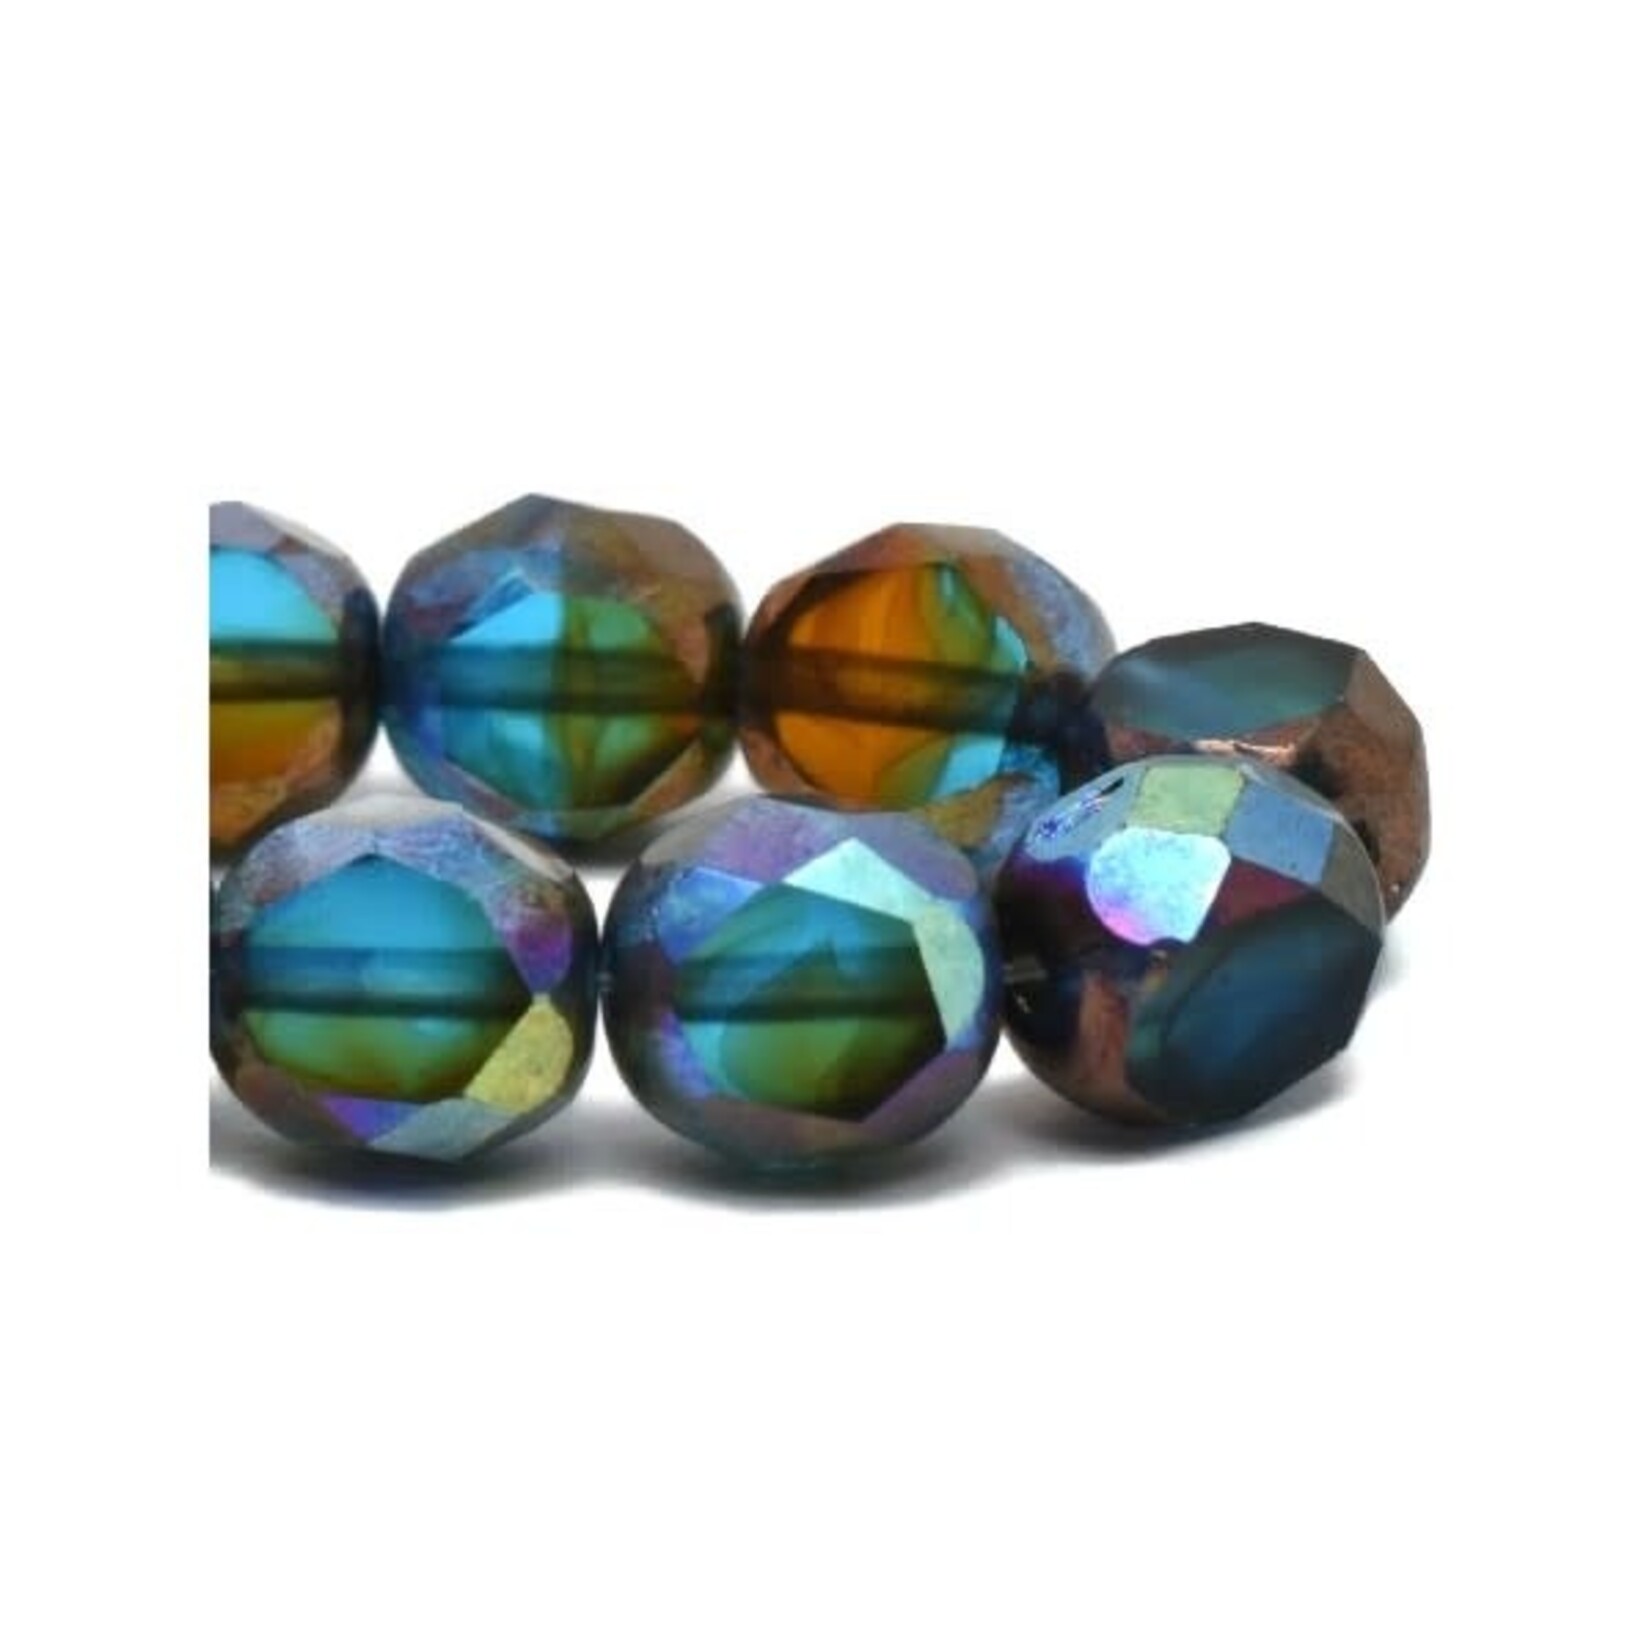 Table Cut Faceted Round 8mm  Pacific Blue, Amber, and Green with Bronze and AB Finishes